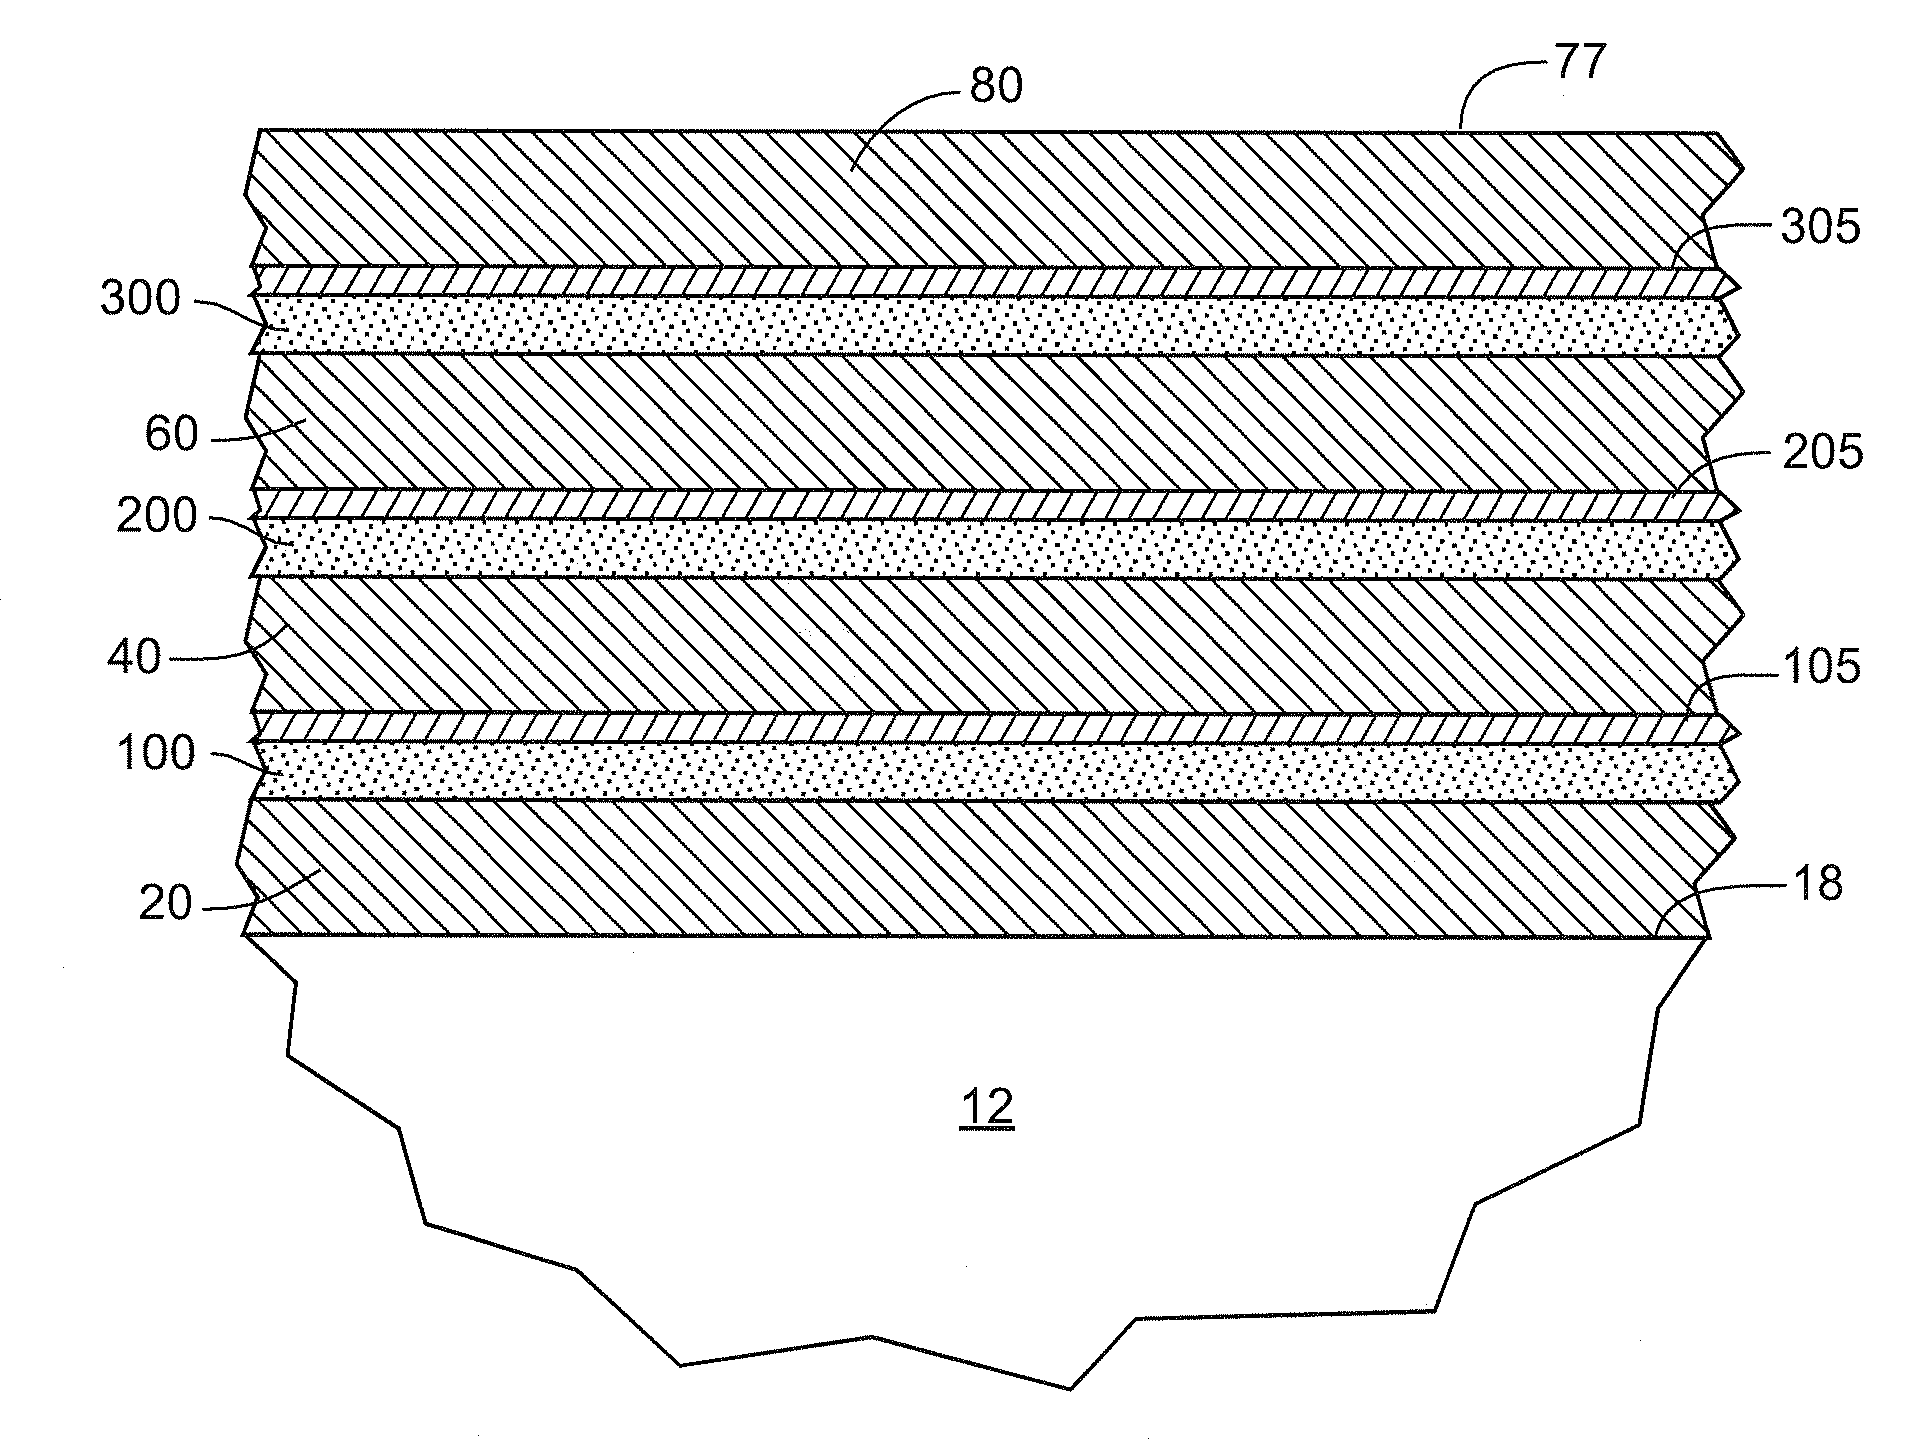 High infrared reflection coatings and thin film coating deposition methods